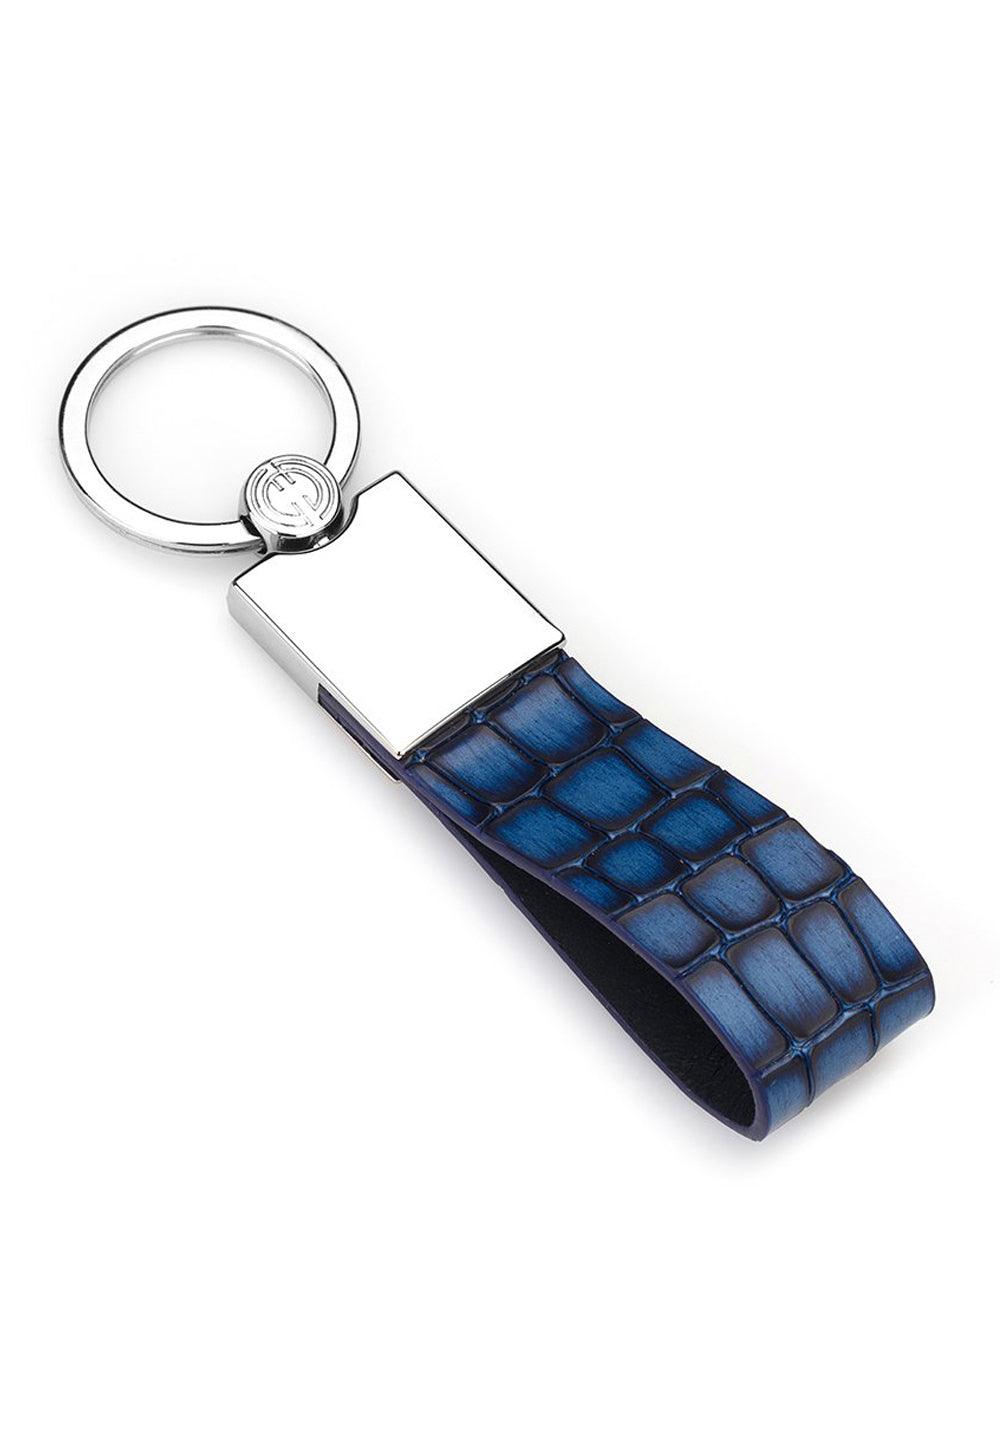 A cool color of indigo blue stamped in soft leather makes for a good gift for yourself or someone else.  Soft leather fashion stamped. Chrome accent key holder. Approximately 3" by 1/2"  By Marcello Sport